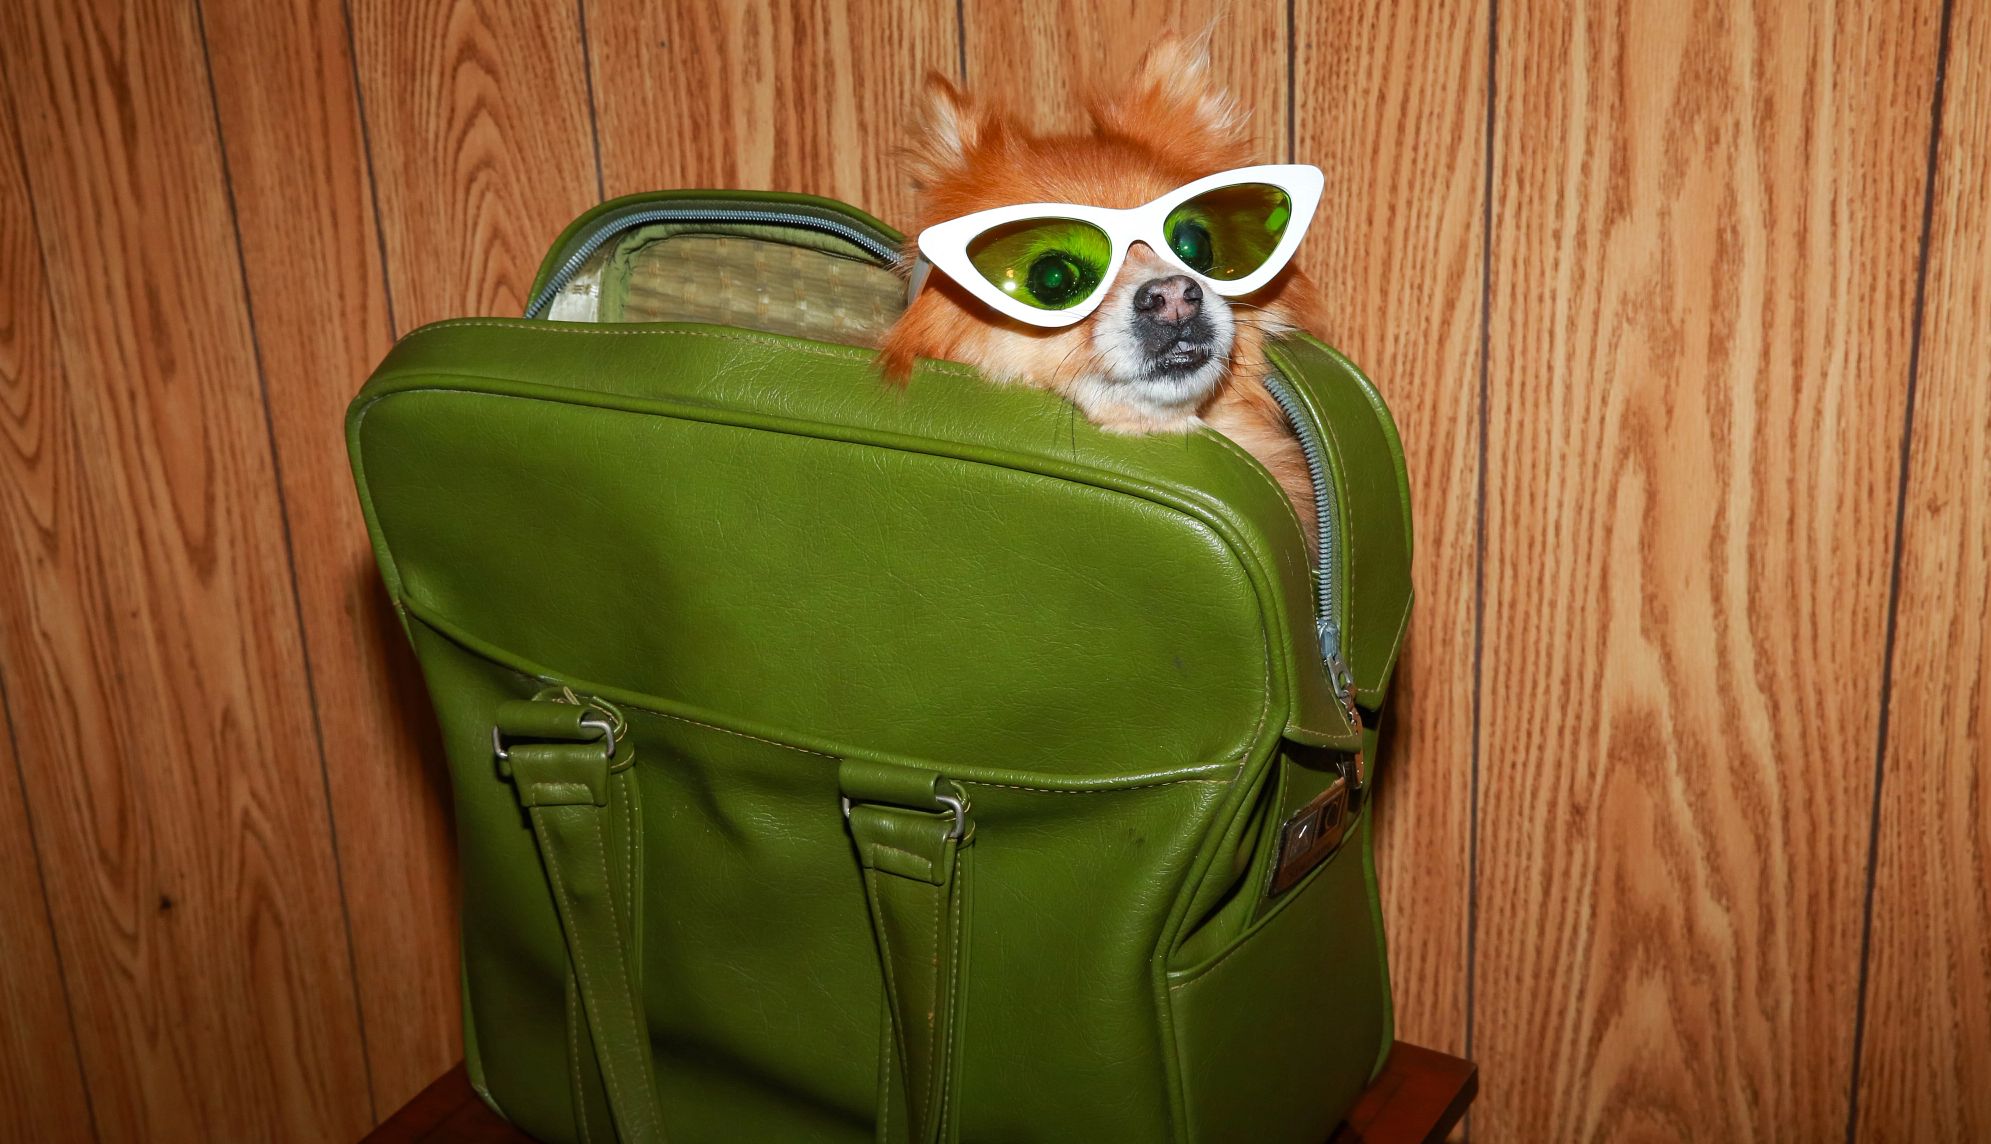 a small dog, wearing glasses is inside a green piece of luggage